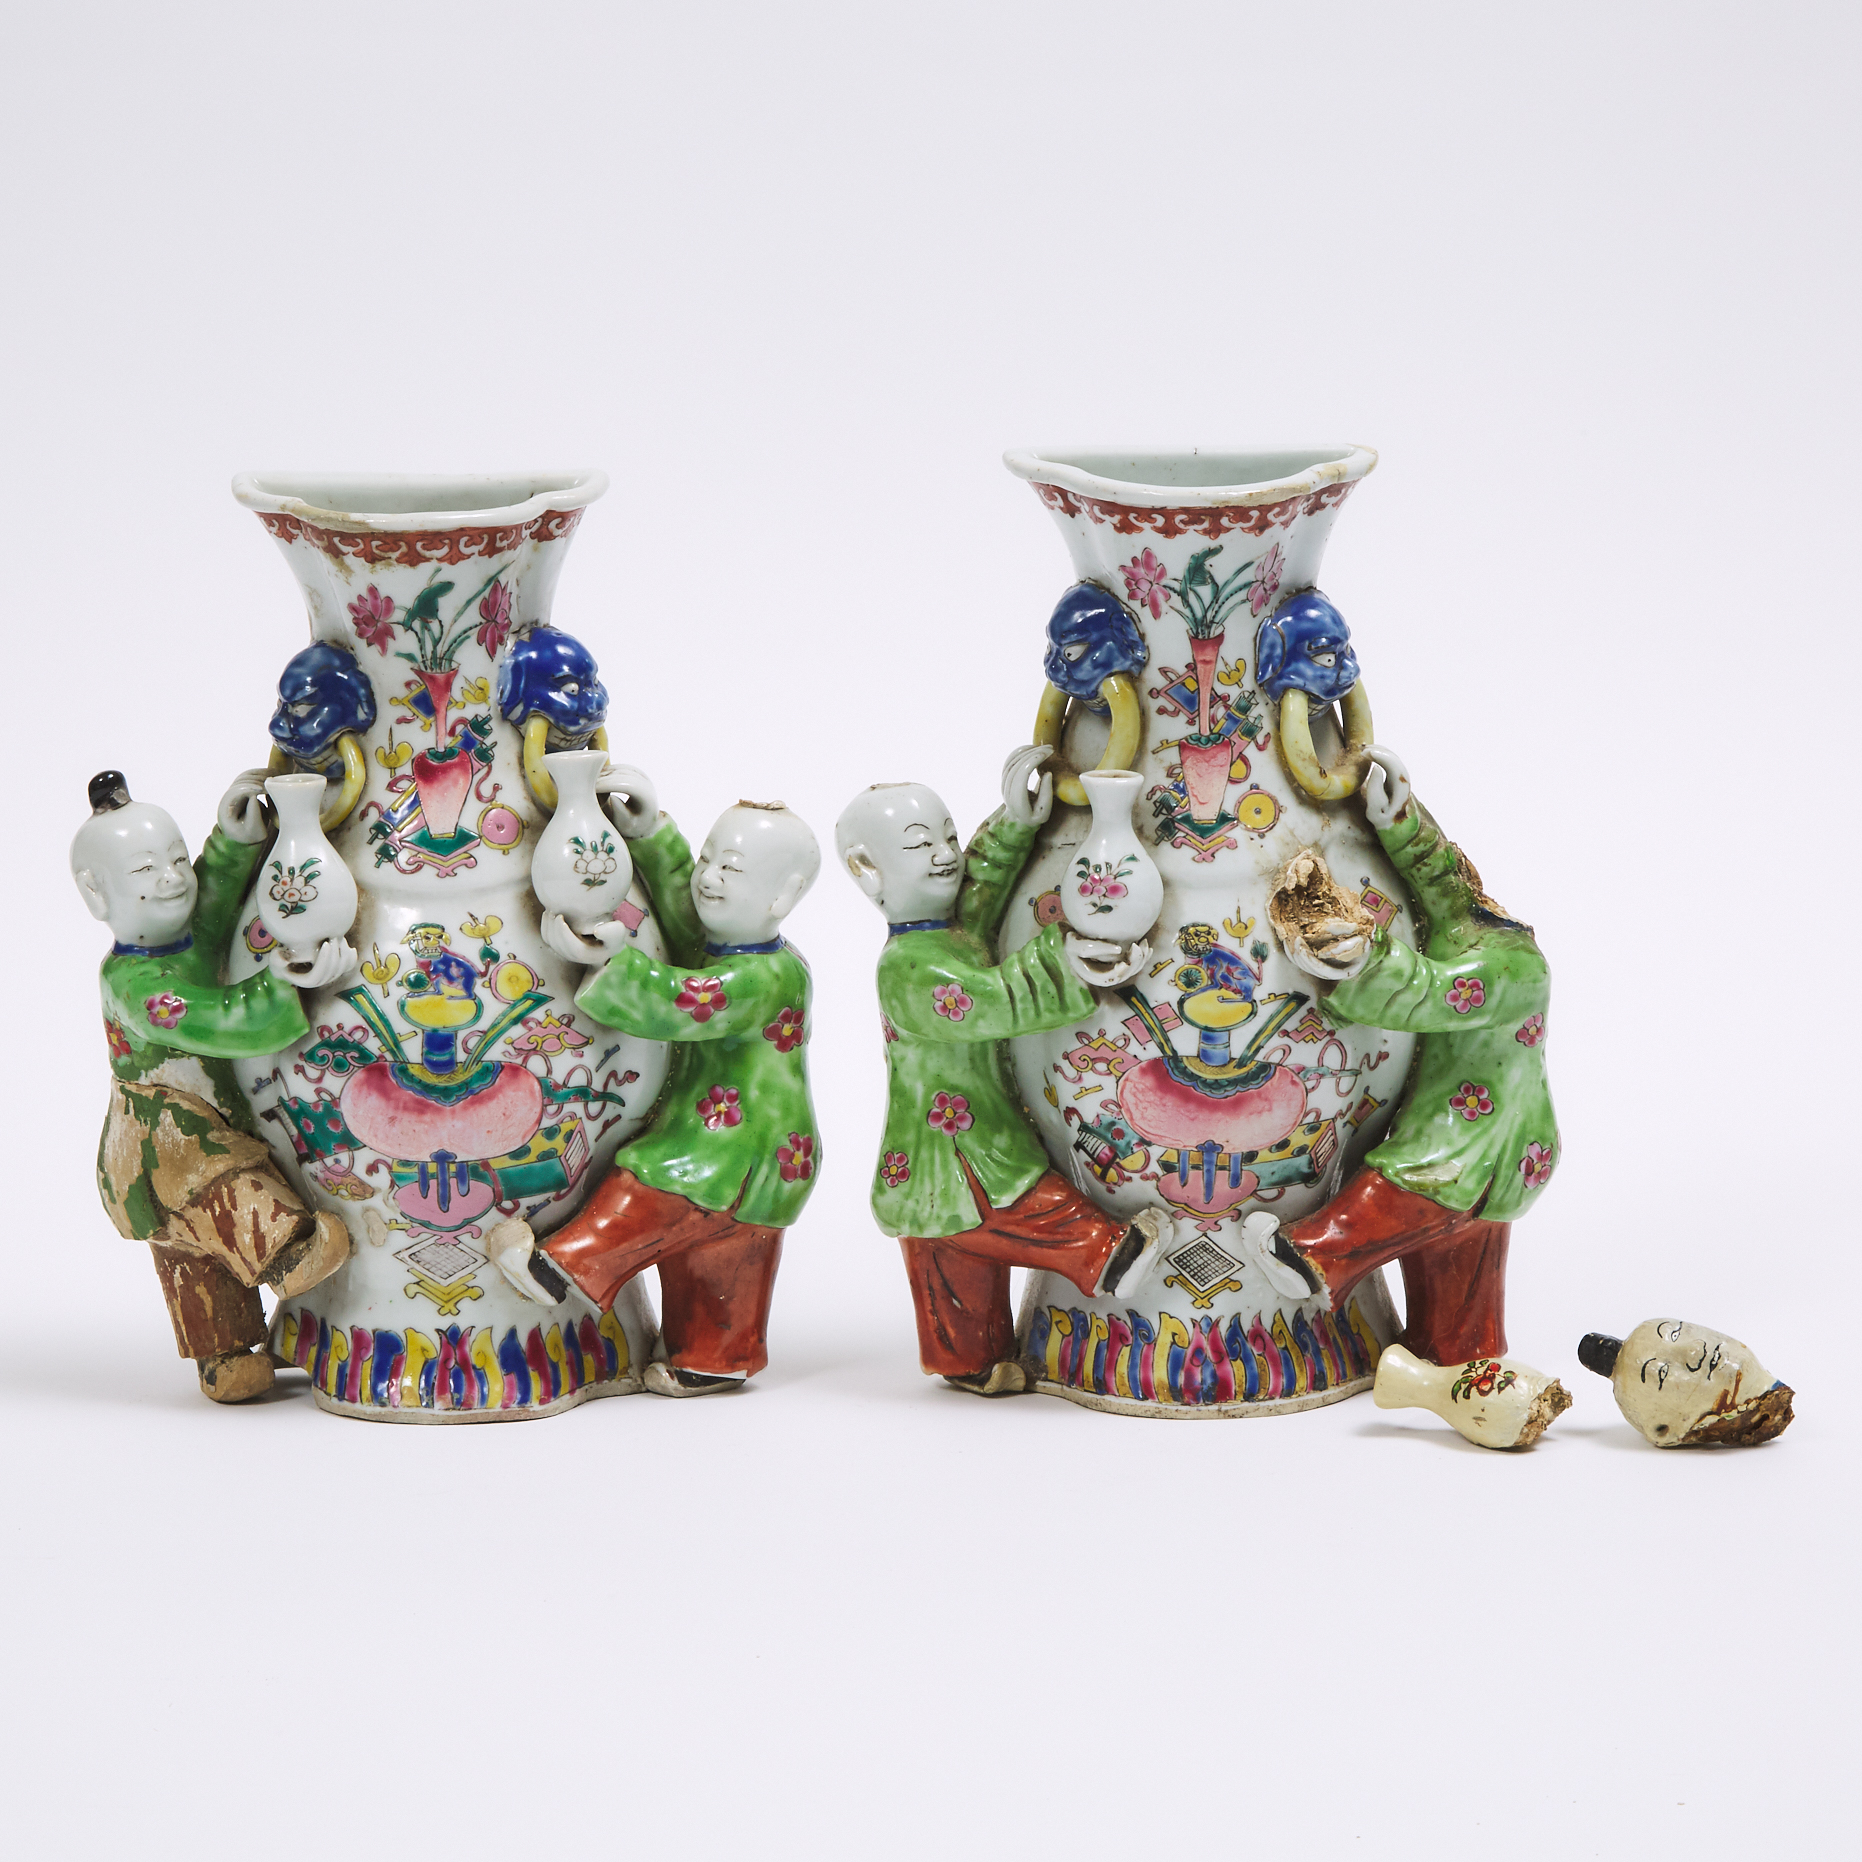 A Pair of Famille Rose Wall Vases, 19th Century